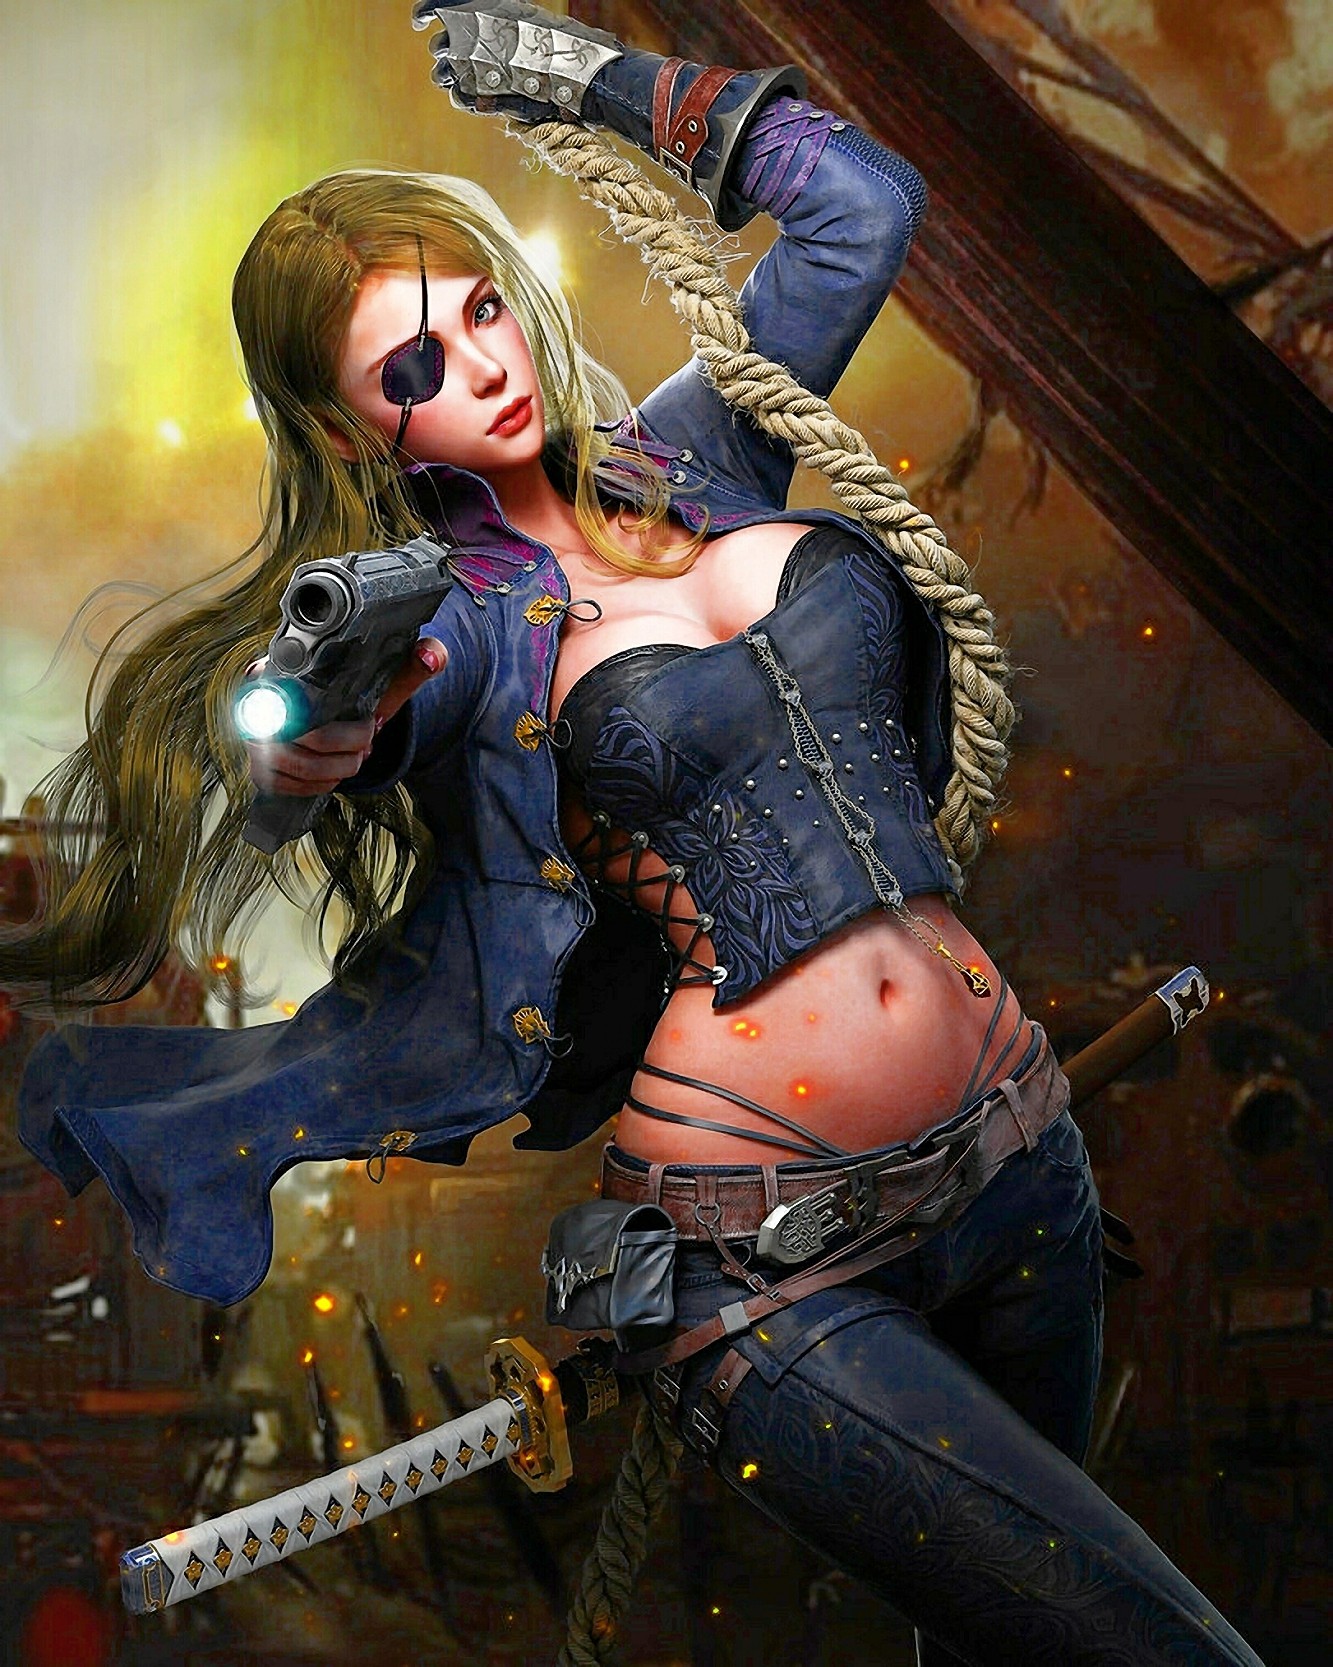 General 1333x1667 blonde katana cleavage drawing fantasy art belly ropes jeans gun pistol sword girls with guns weapon bare midriff eyepatches aiming long hair women with swords red lipstick